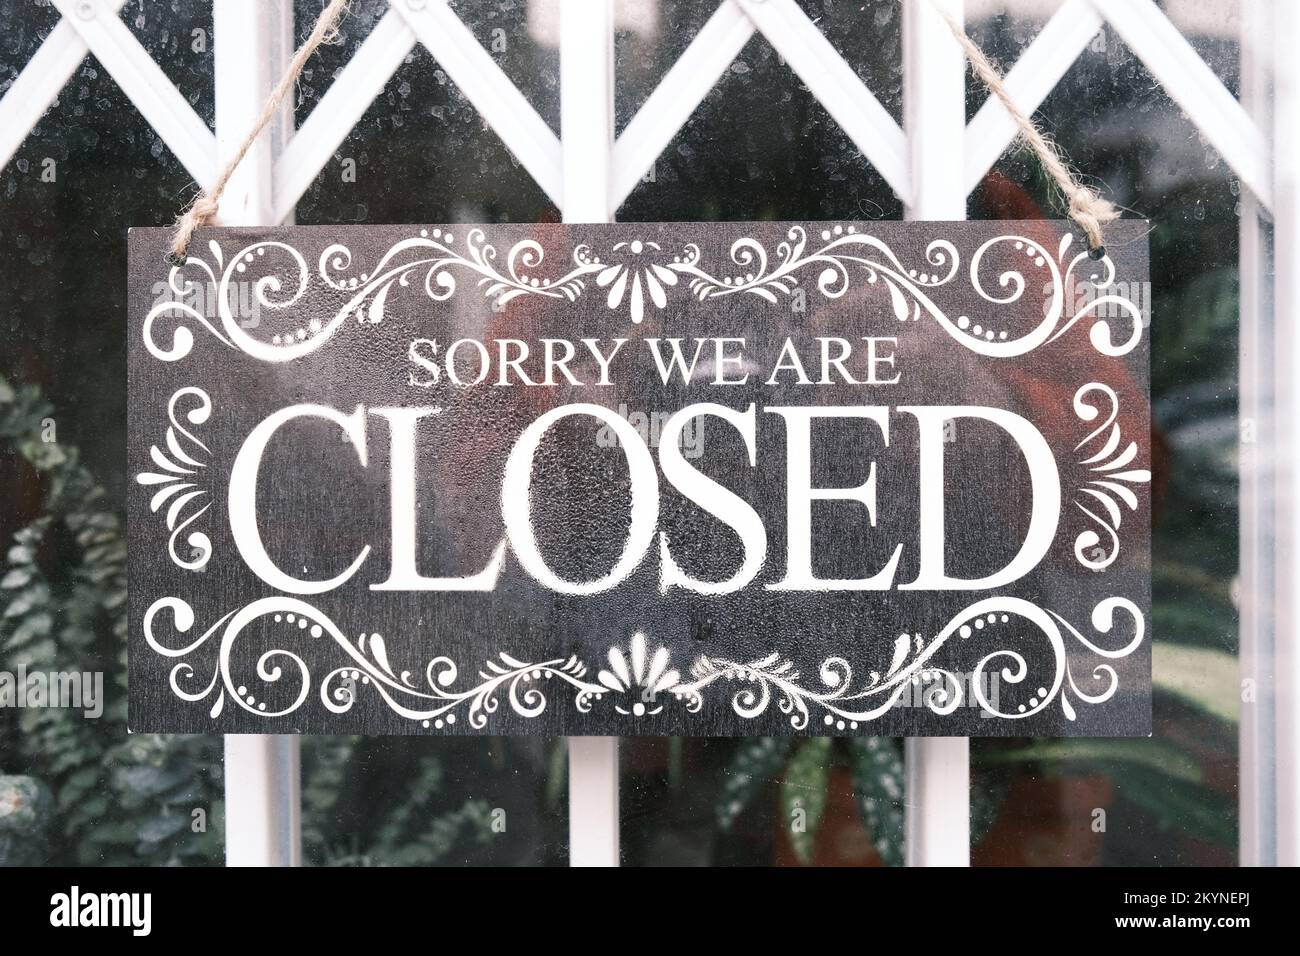 Sorry We Are Closed Sign on a Shop. Stock Photo